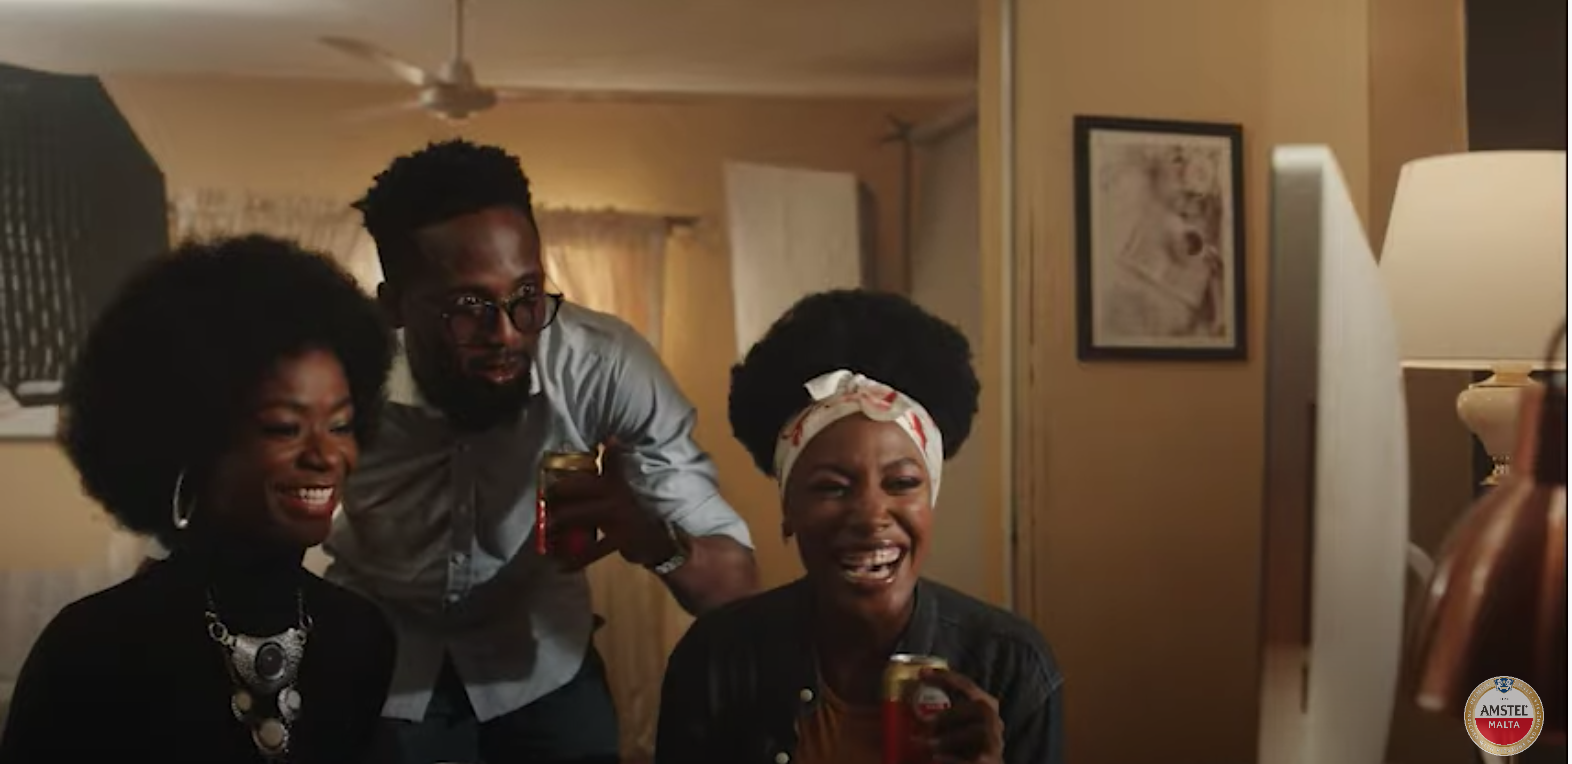 What’s the big deal about the Amstel Malta ‘My Time is Now’ campaign?